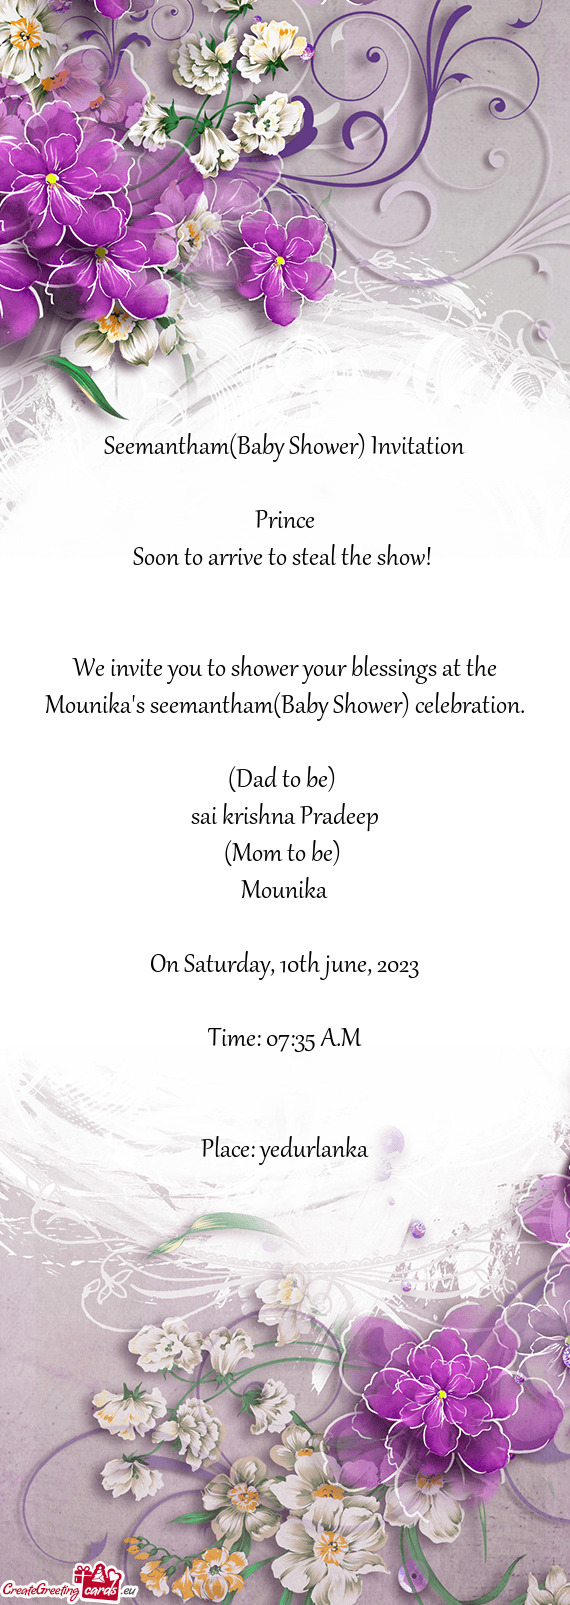 We invite you to shower your blessings at the Mounika